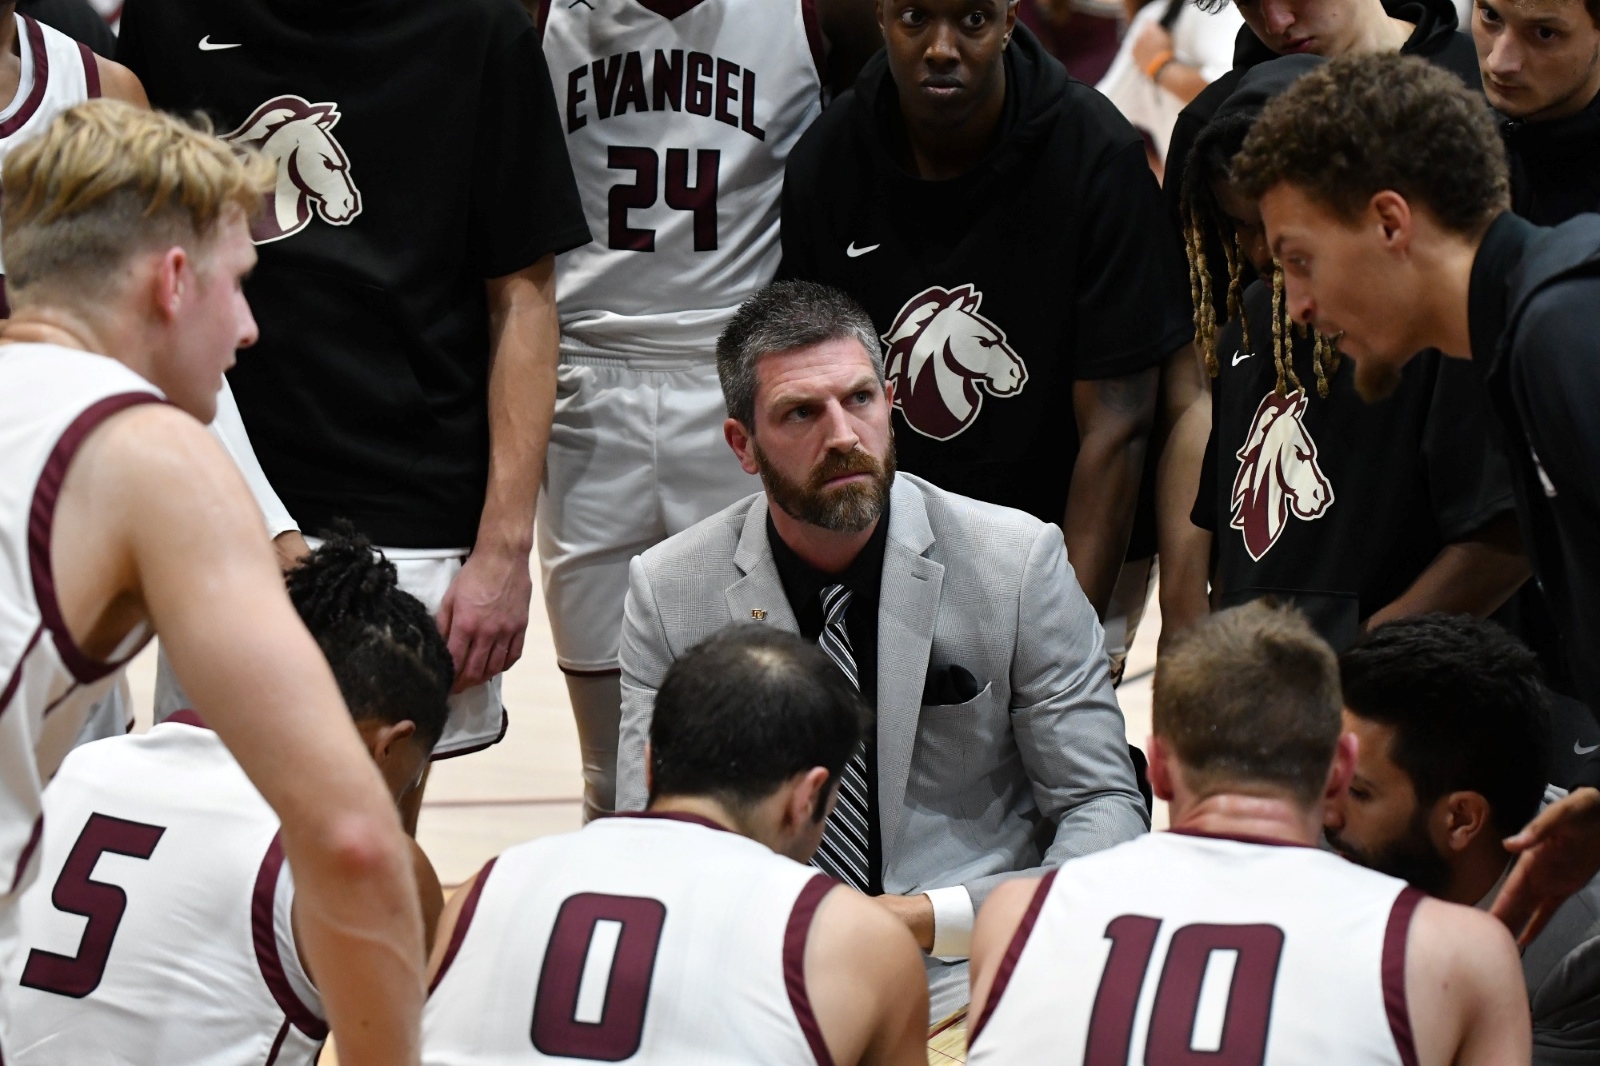 Evangel University men's basketball coach Bert Capel talks to his players during a game